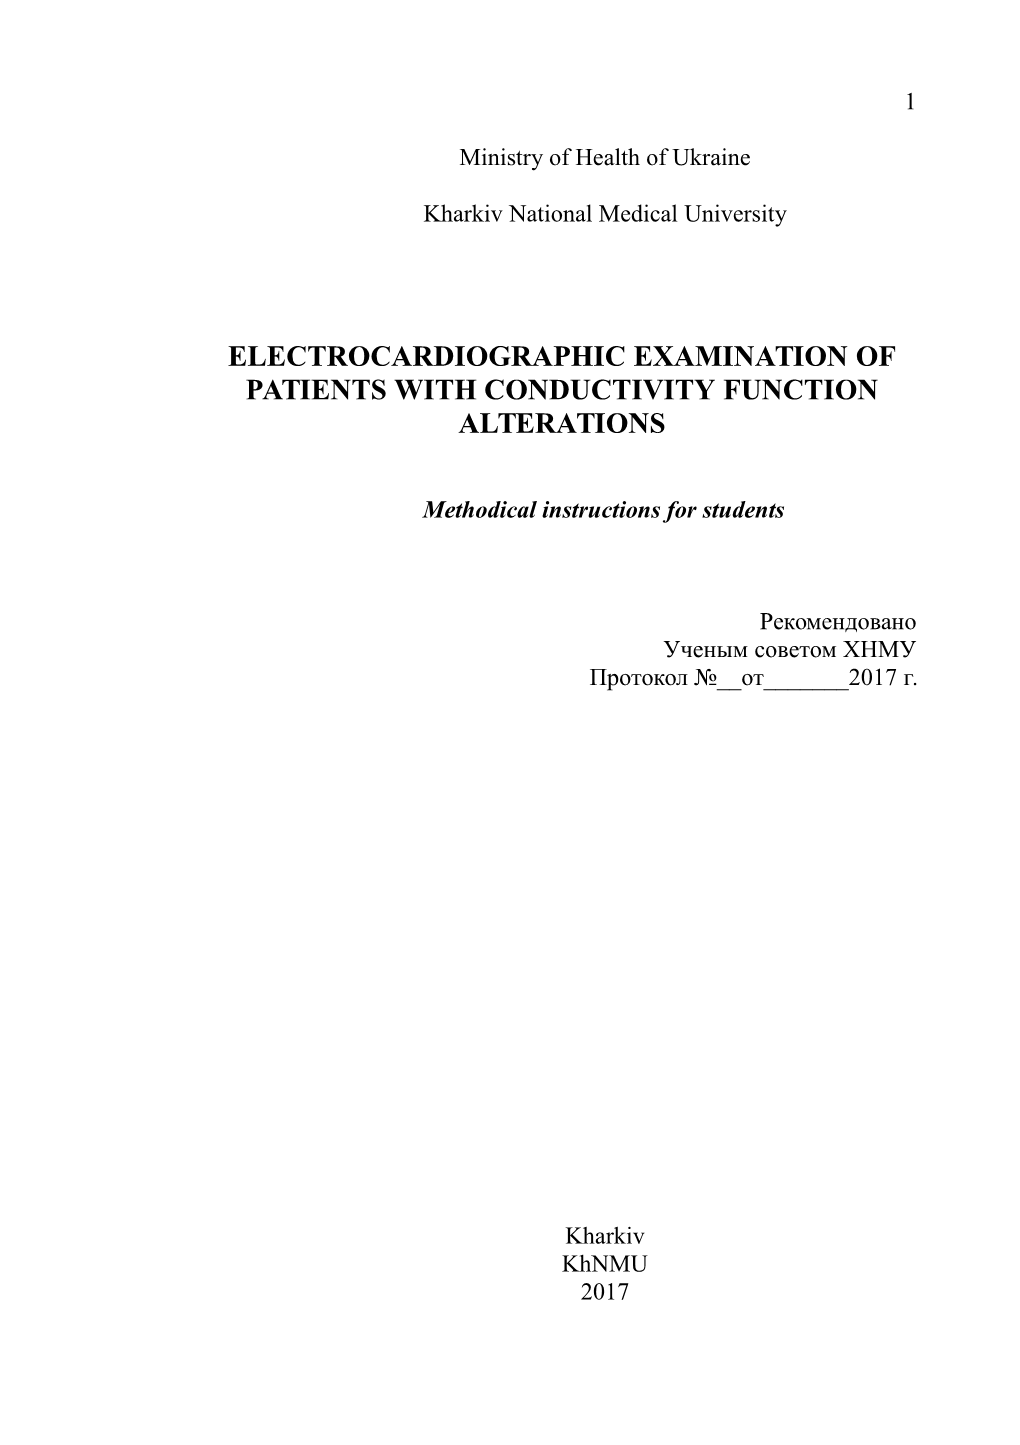 Electrocardiographic Examination of Patients with Conductivity Function Alterations